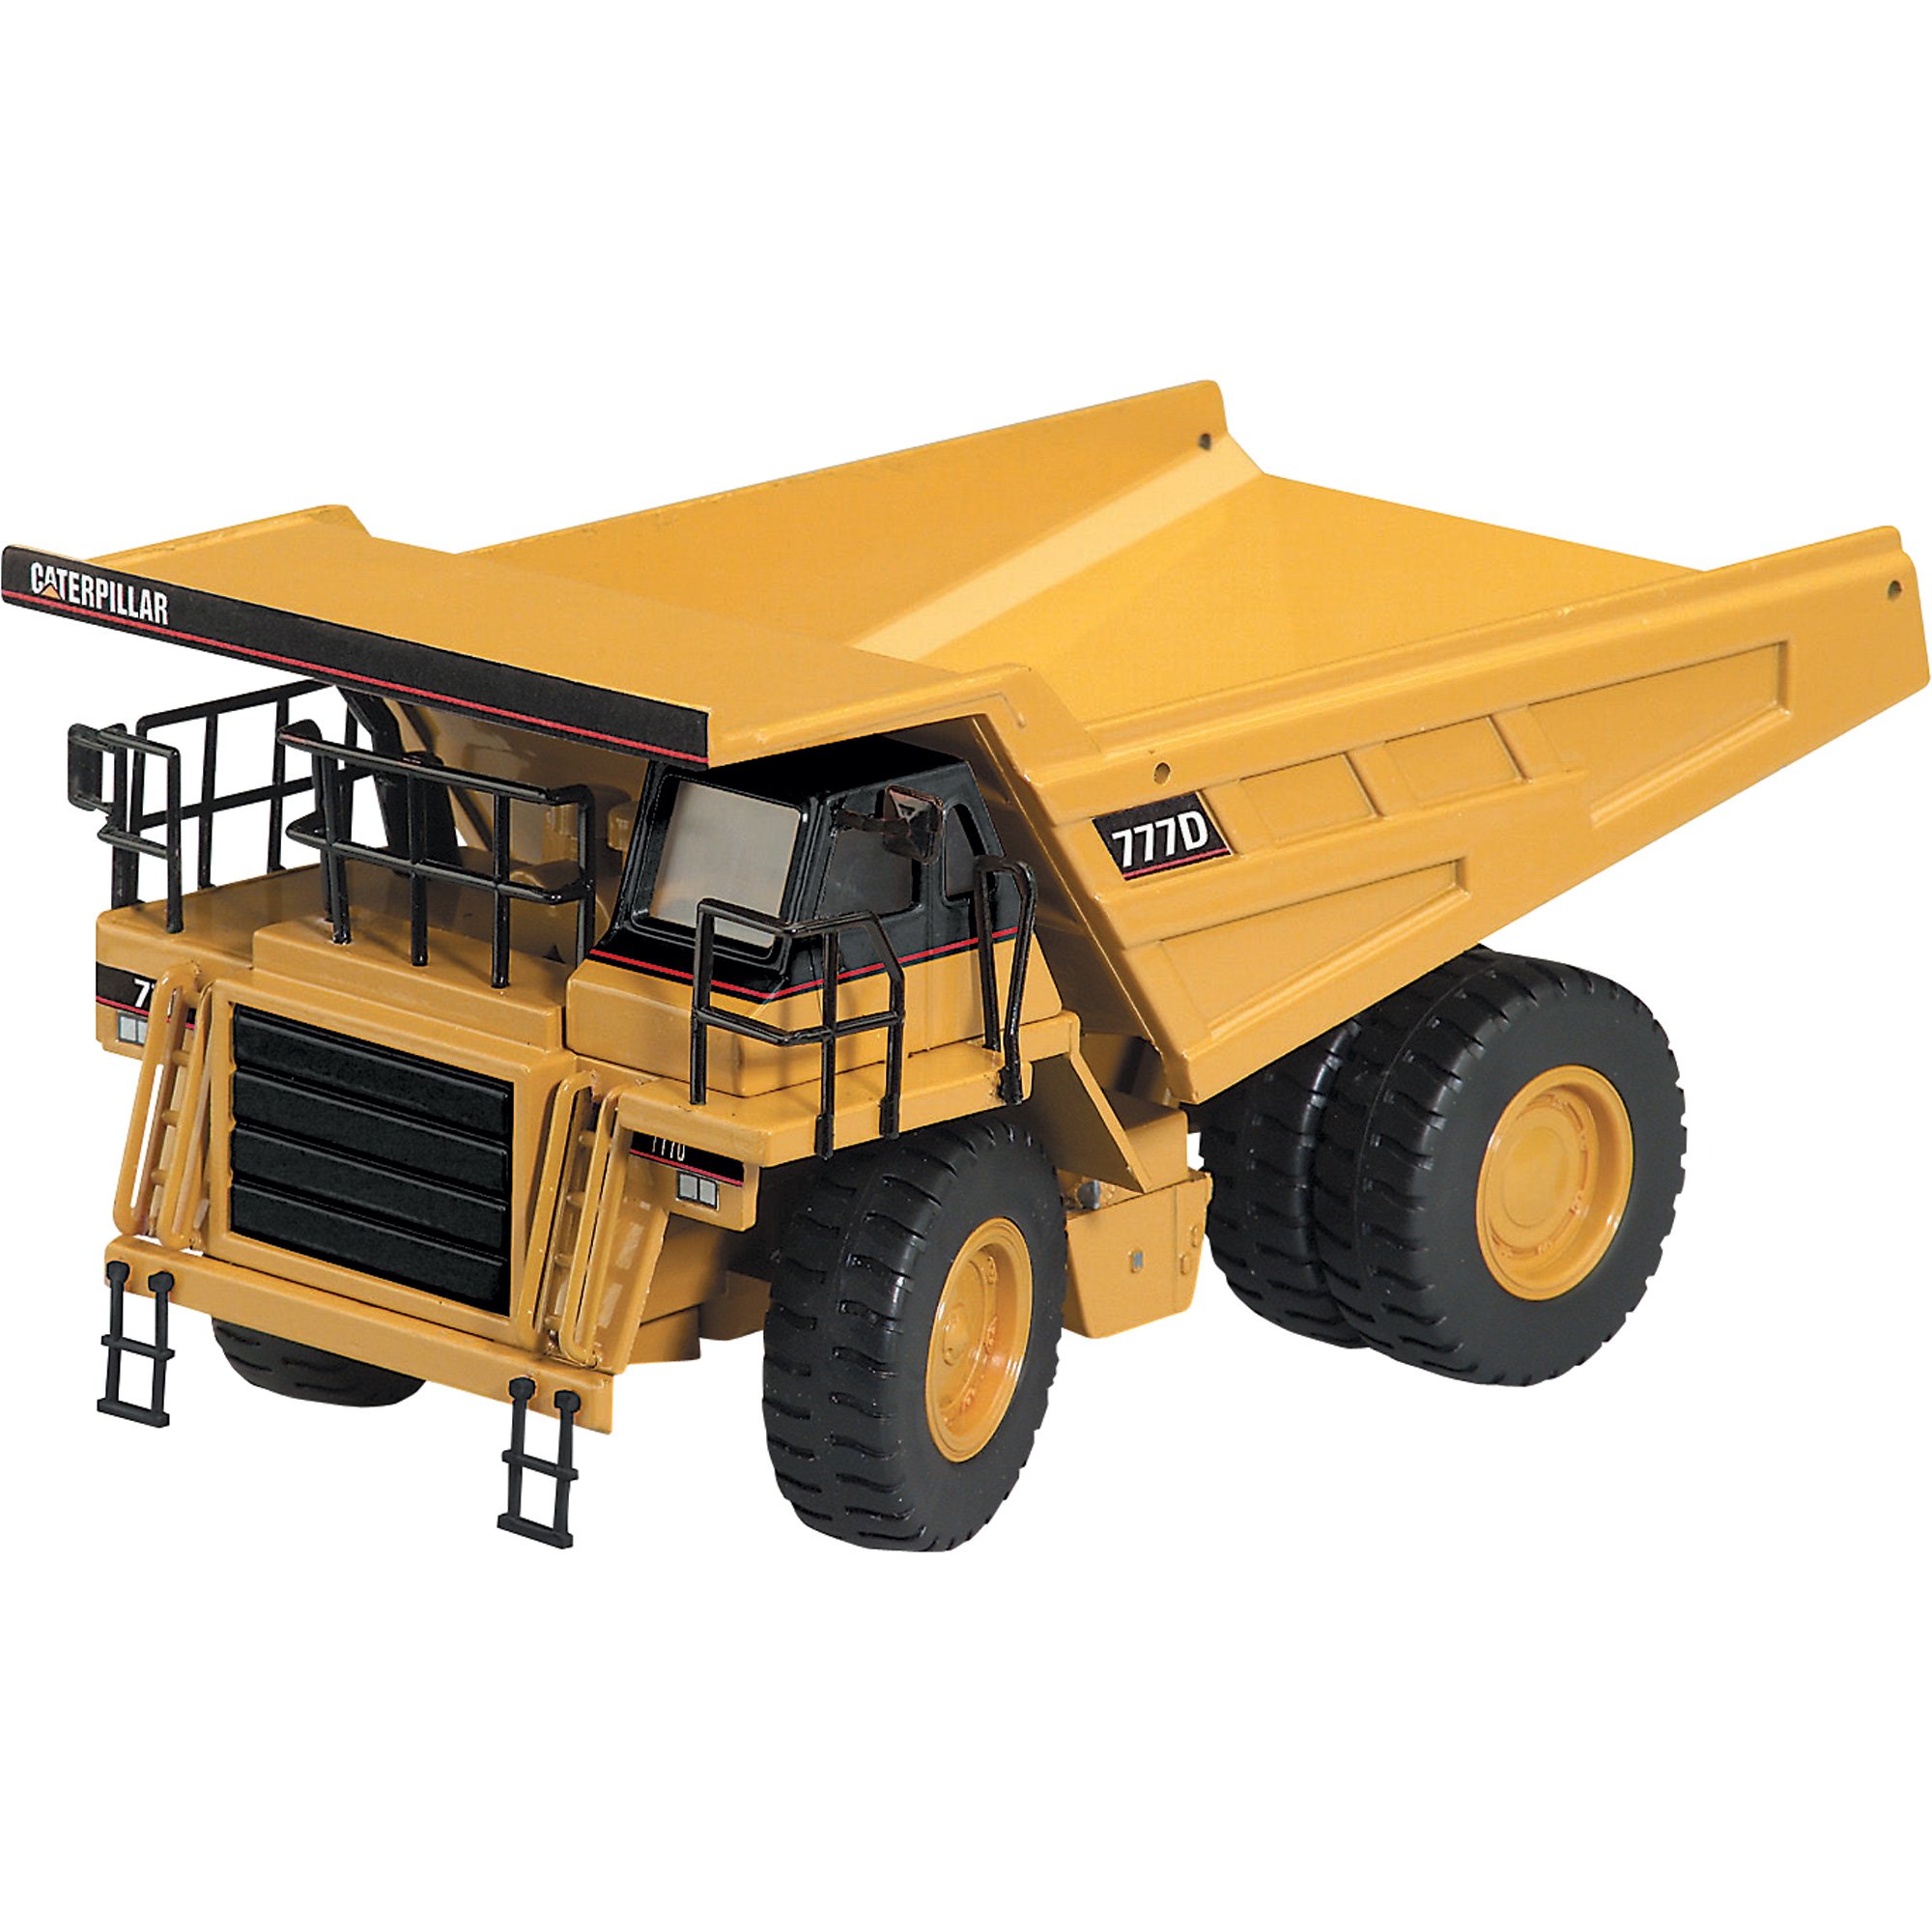 CAT 777D Off Highway Truck Die-Cast Collectible — 1:50 Scale 